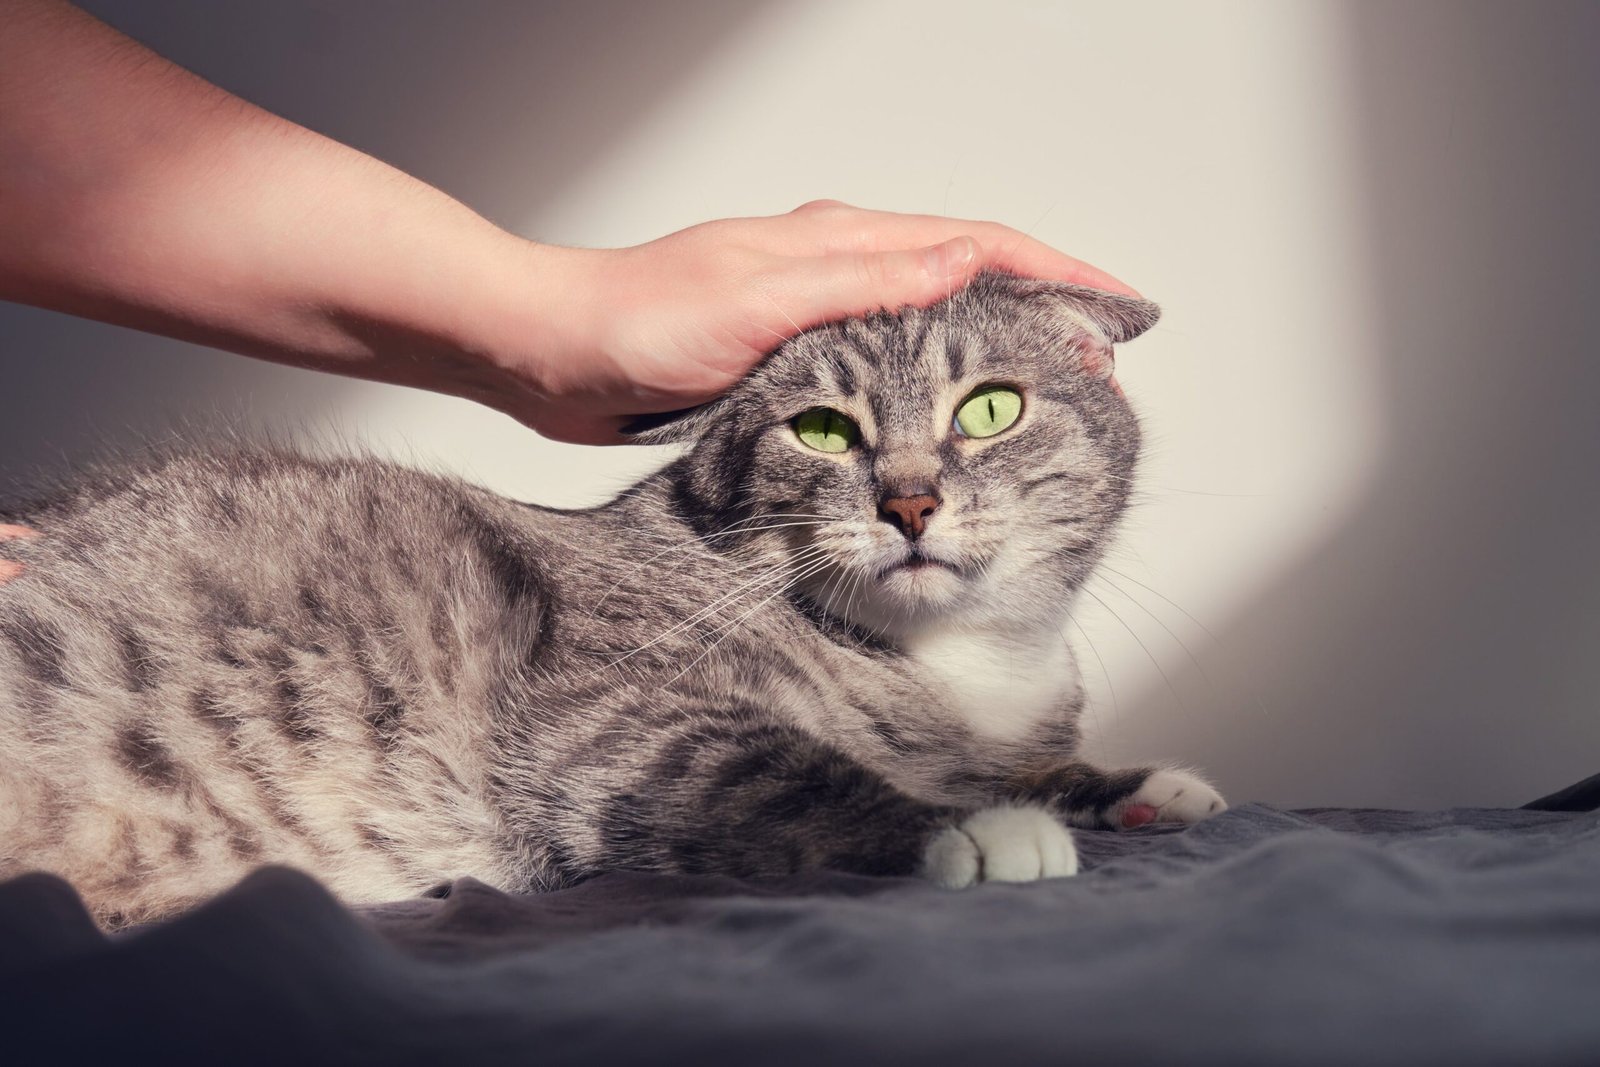 Top 5 Reasons Some People Just Don’t Like Cats: Biting and Scratching